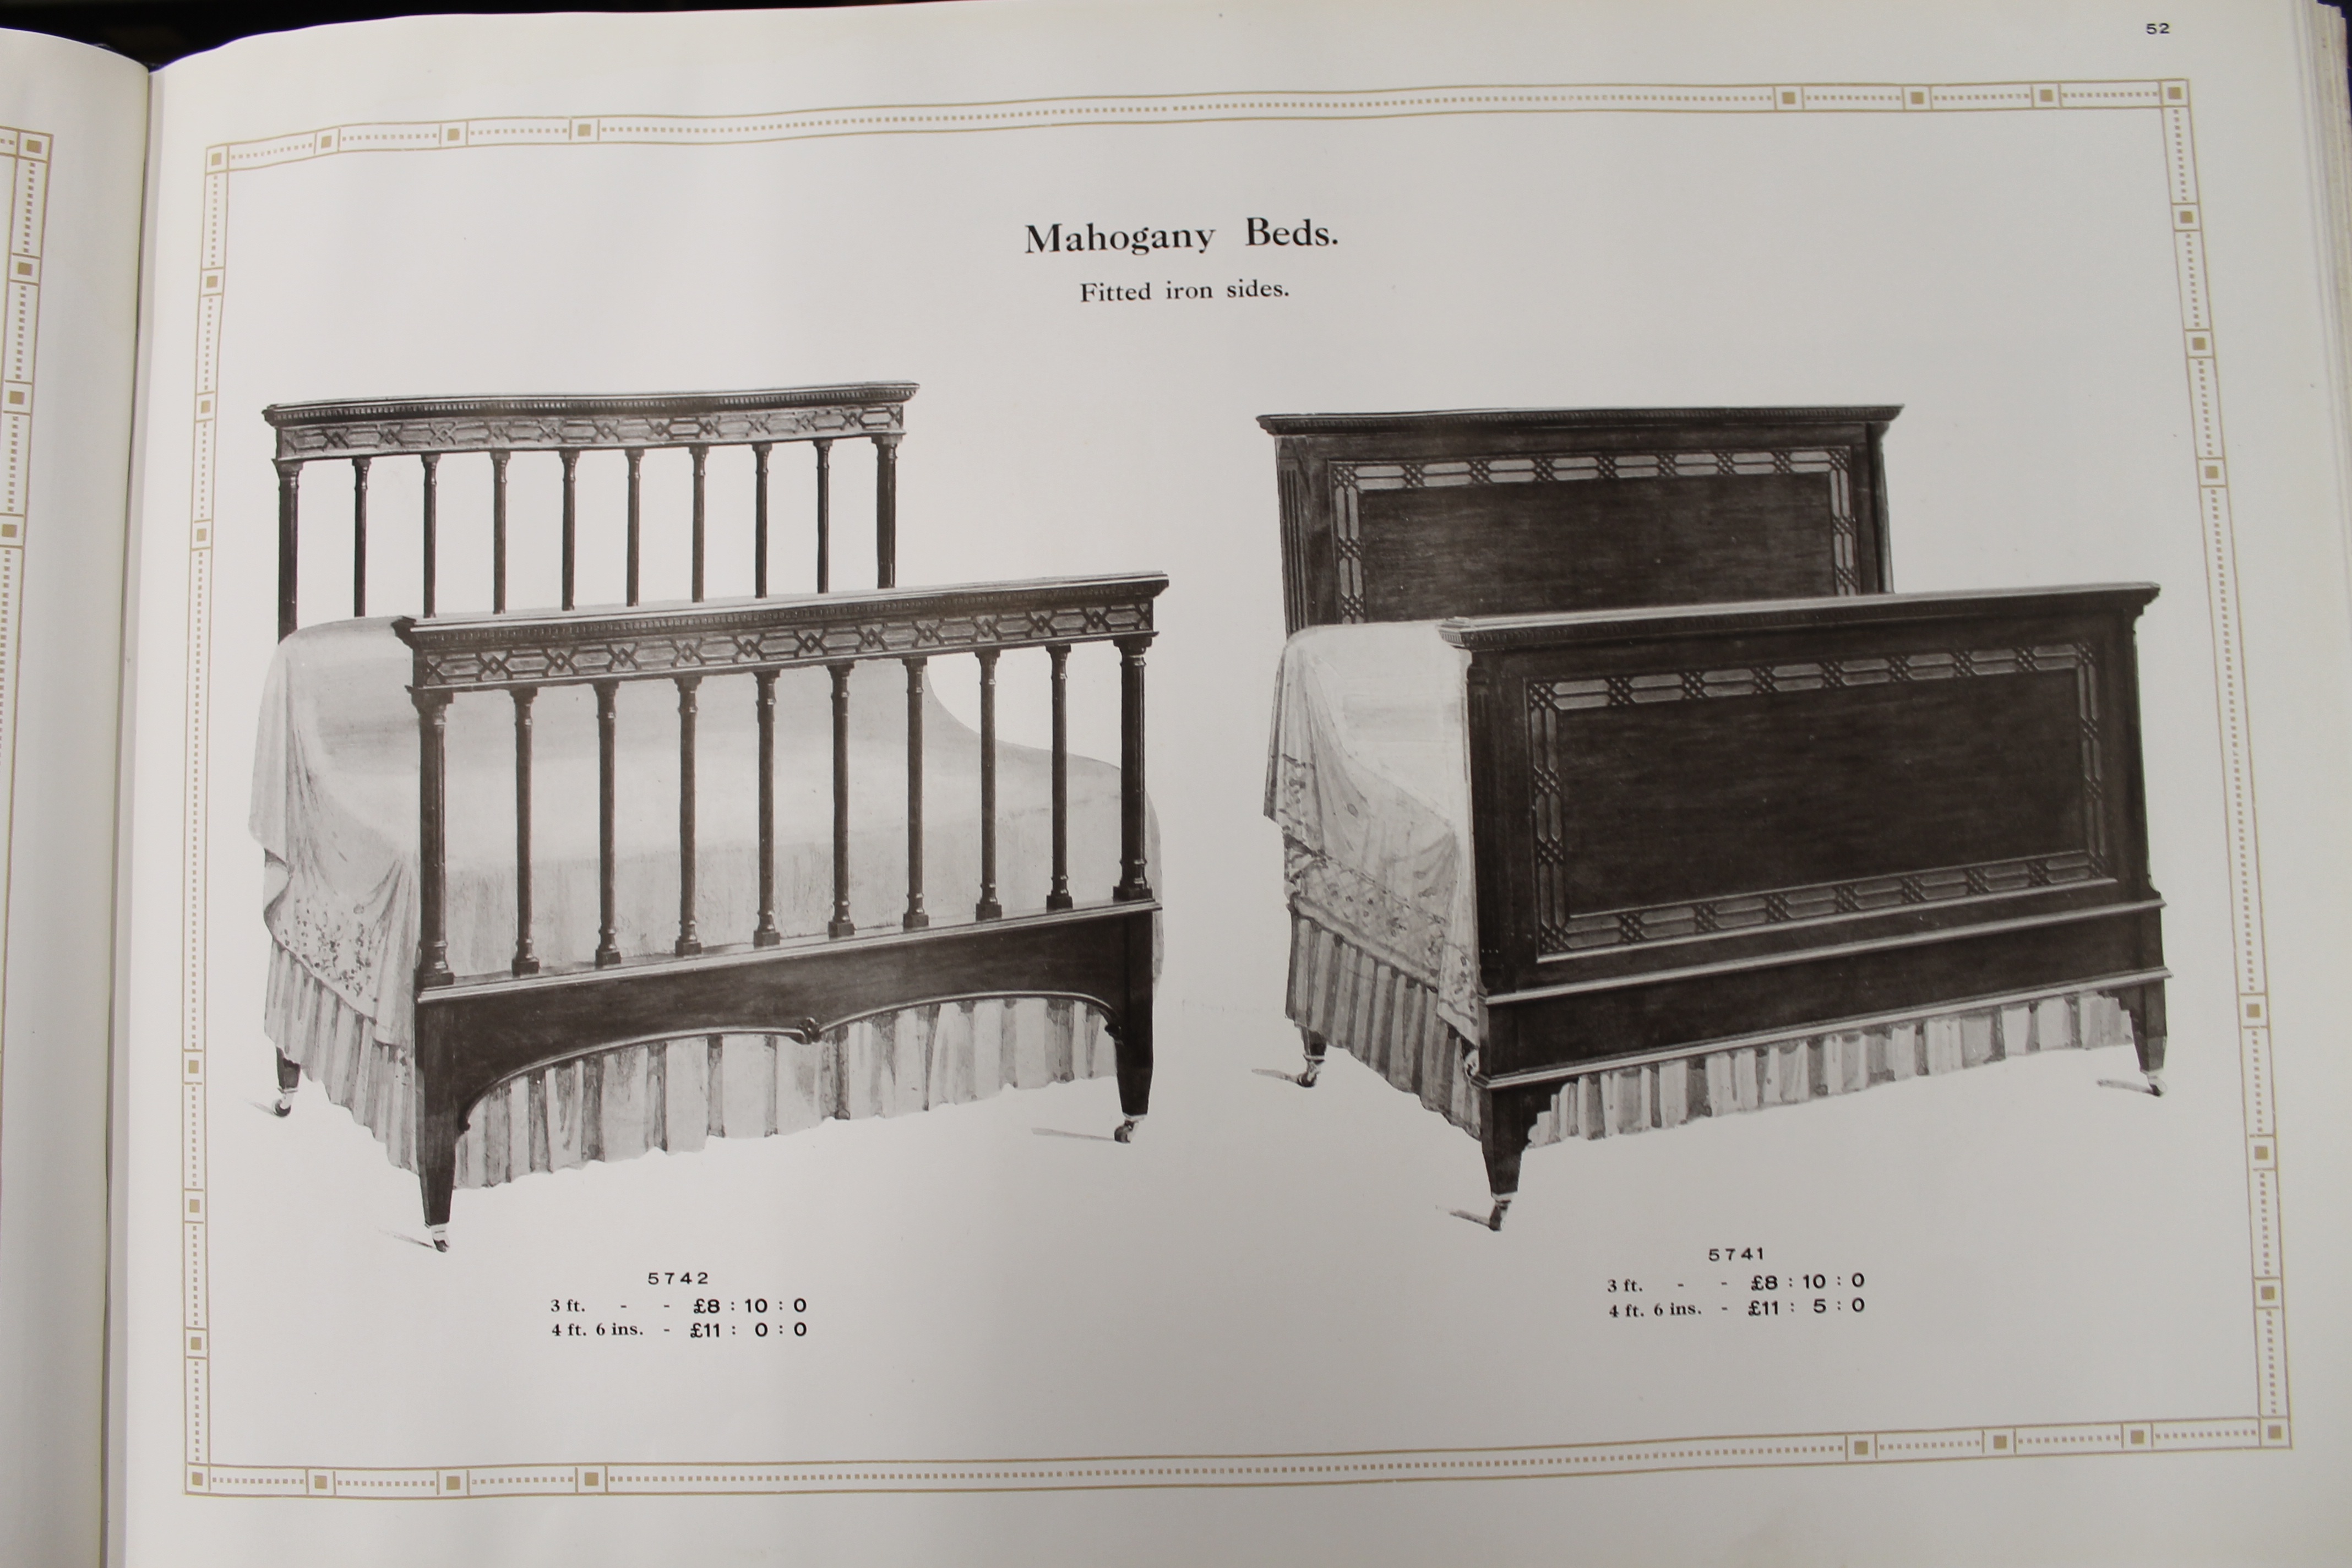 A Furniture Designs Ancient and Modern catalogue. - Image 8 of 10